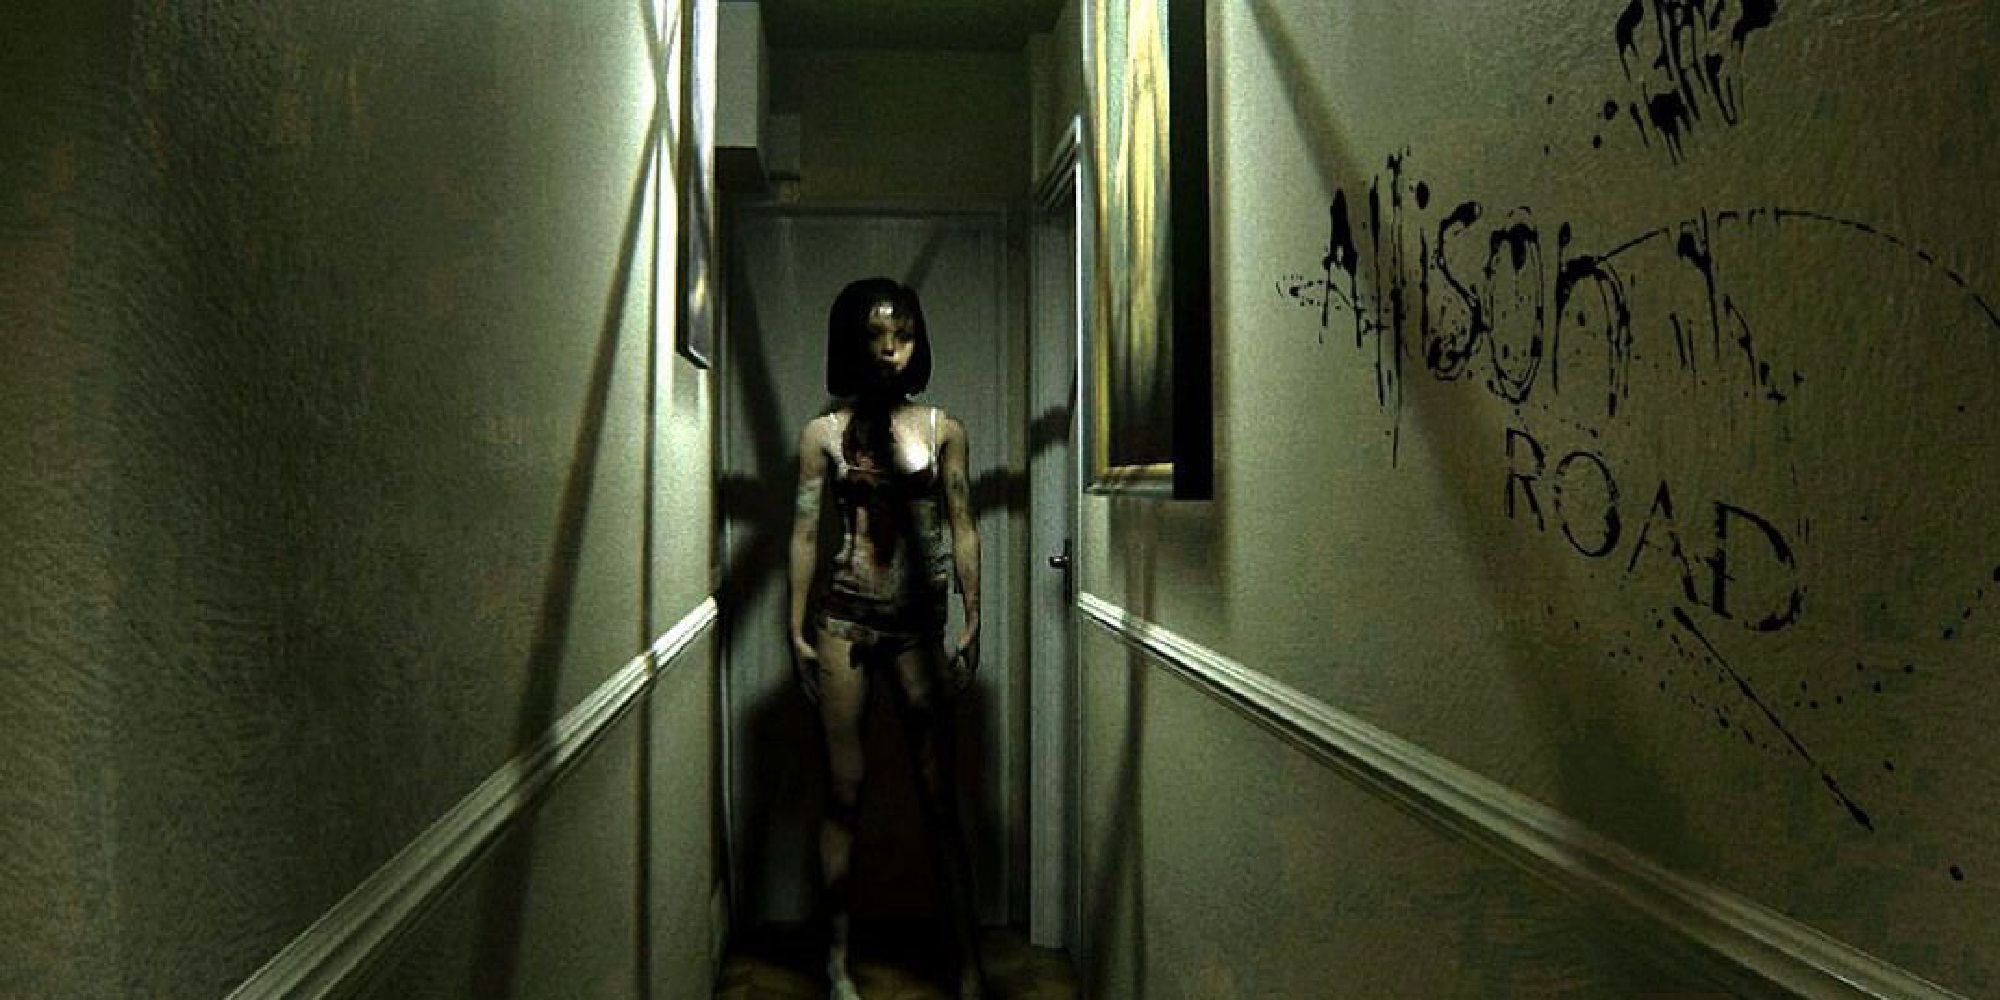 A claustrophobic corridor with the name of the games in blood, a strange doll-like woman standing menacingly on the other side of the corridor.